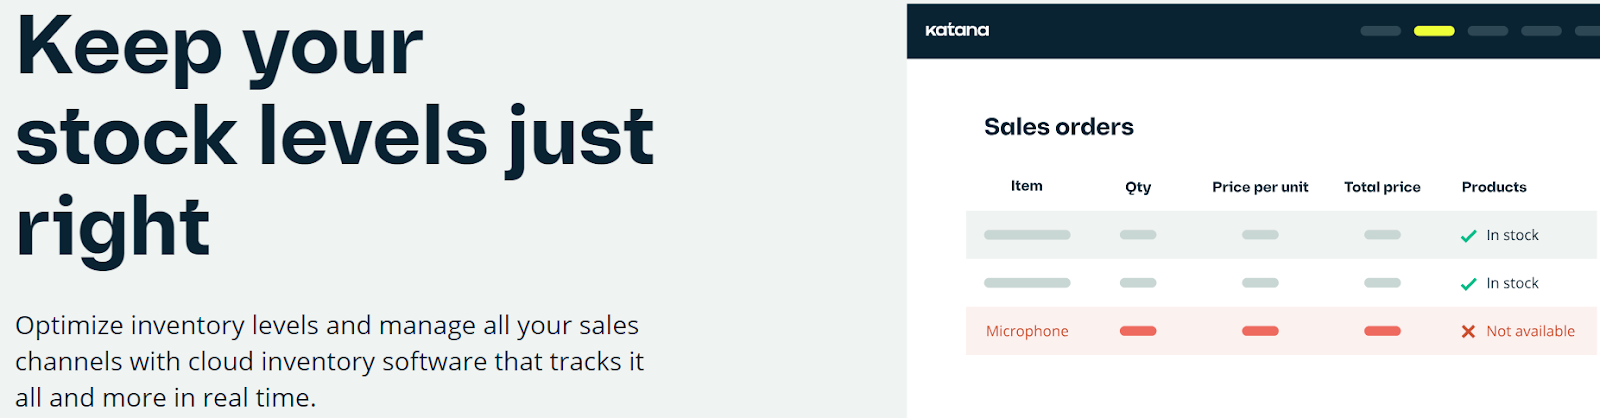 Image showing Kantana as a management system